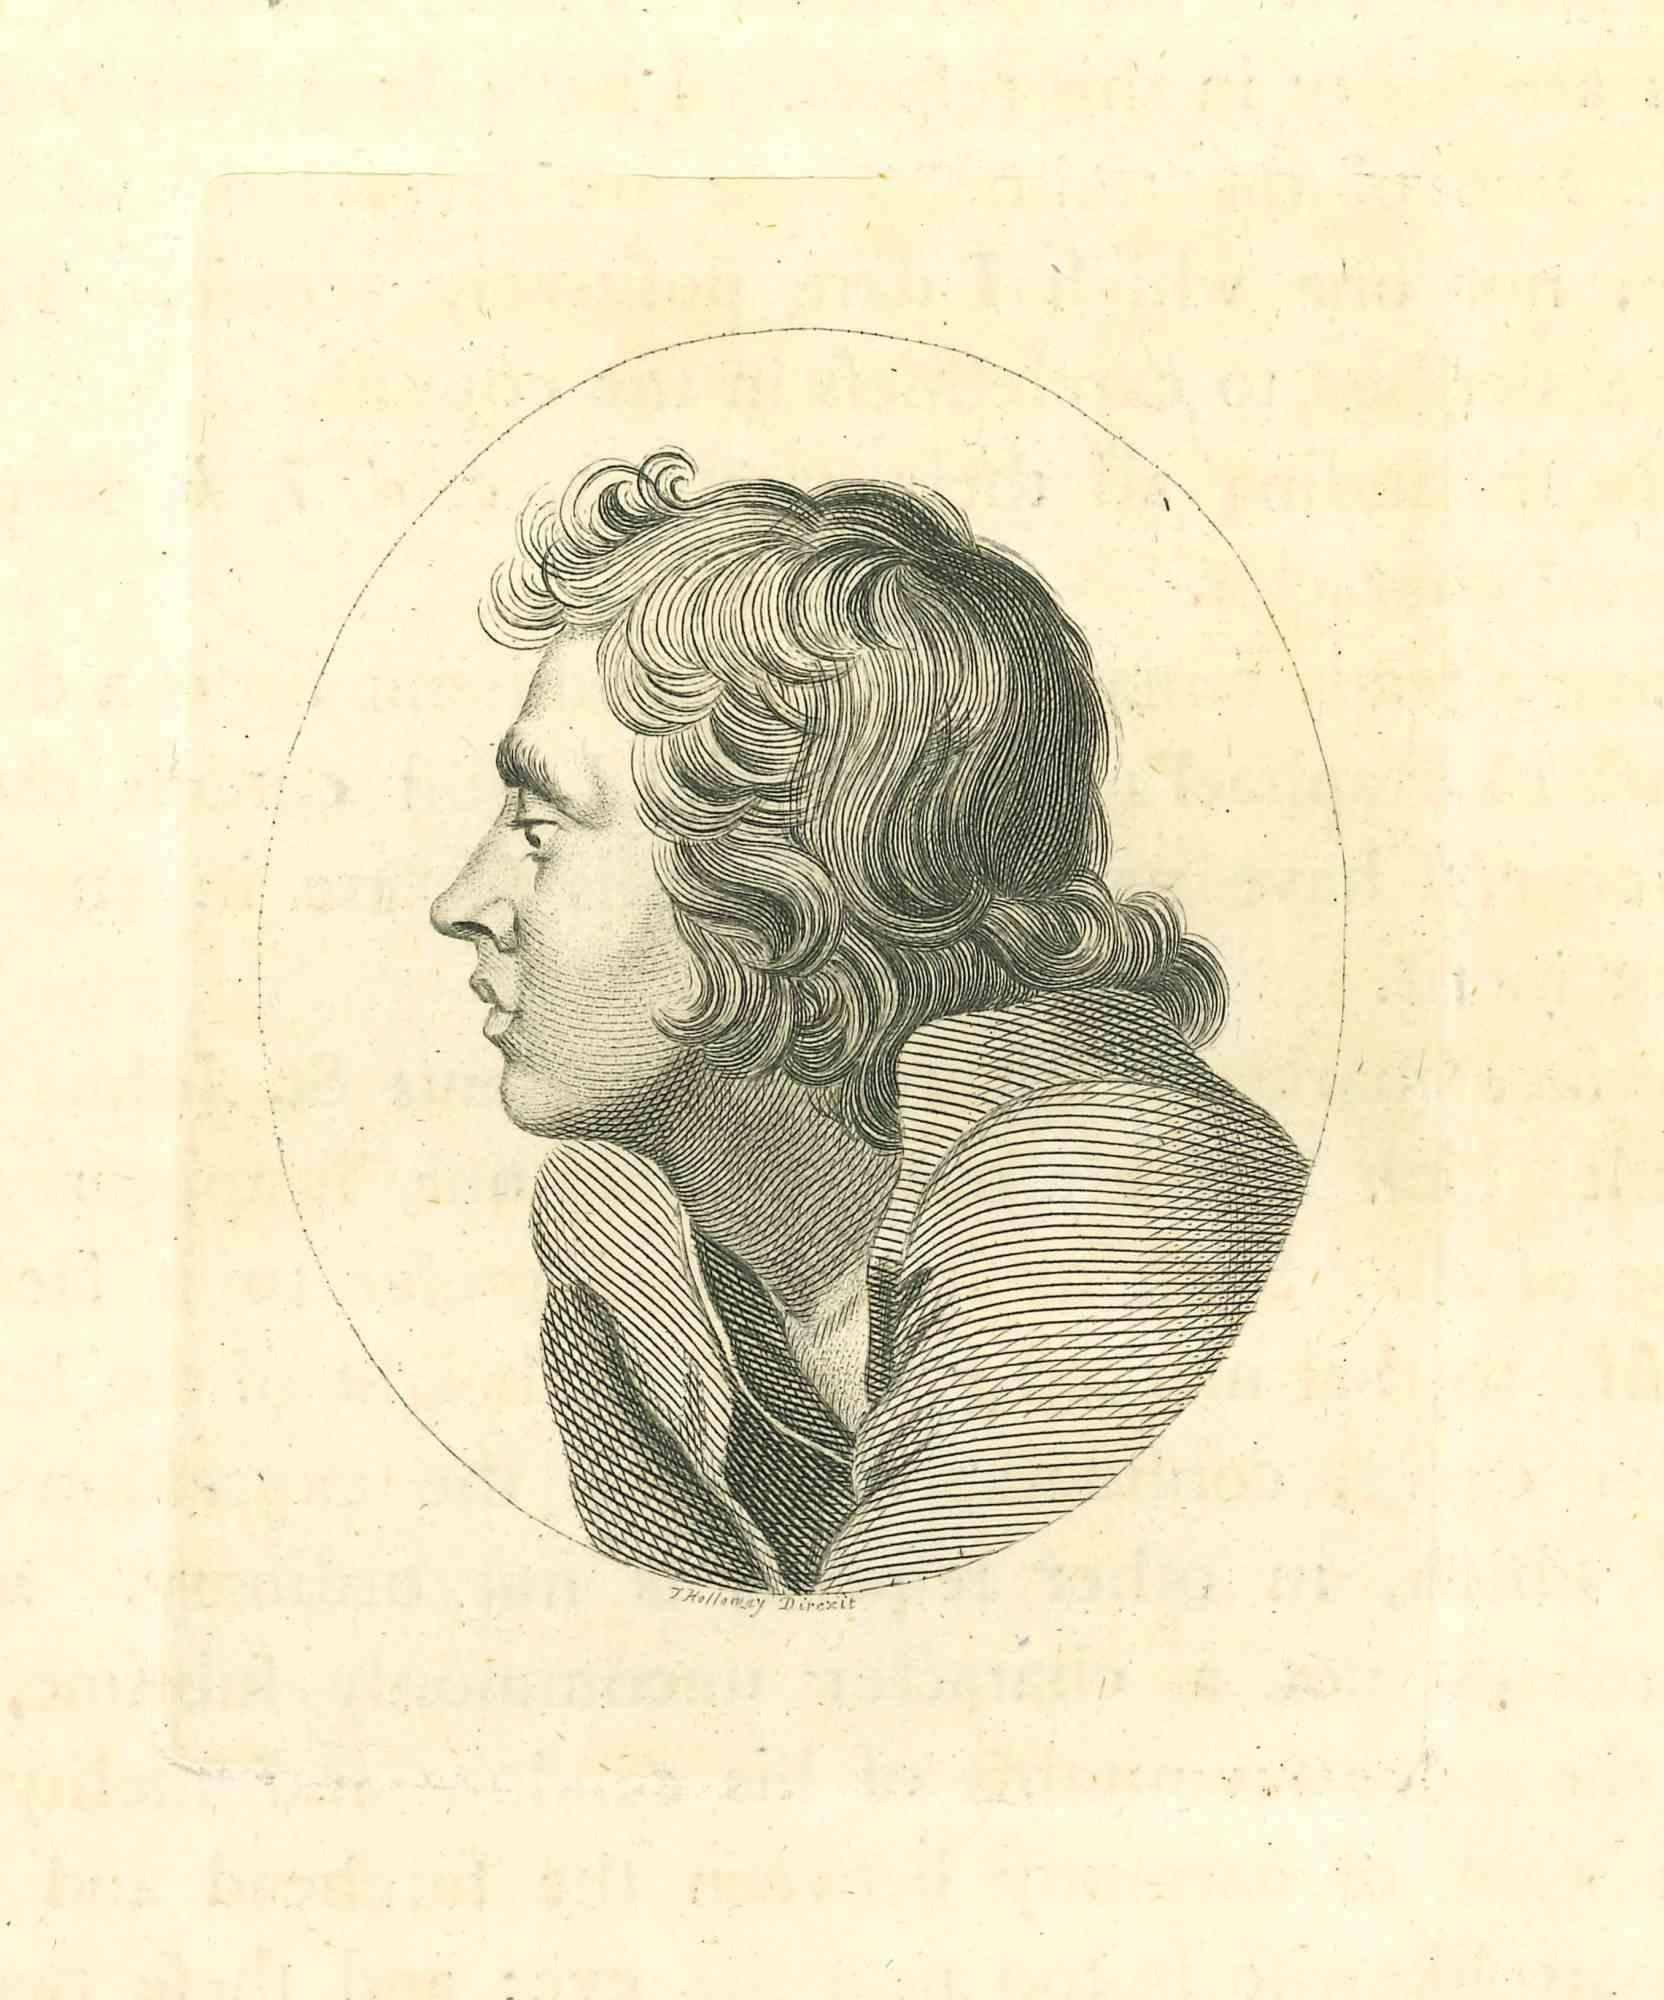 The Portrait - Etching by Thomas Holloway - 1810